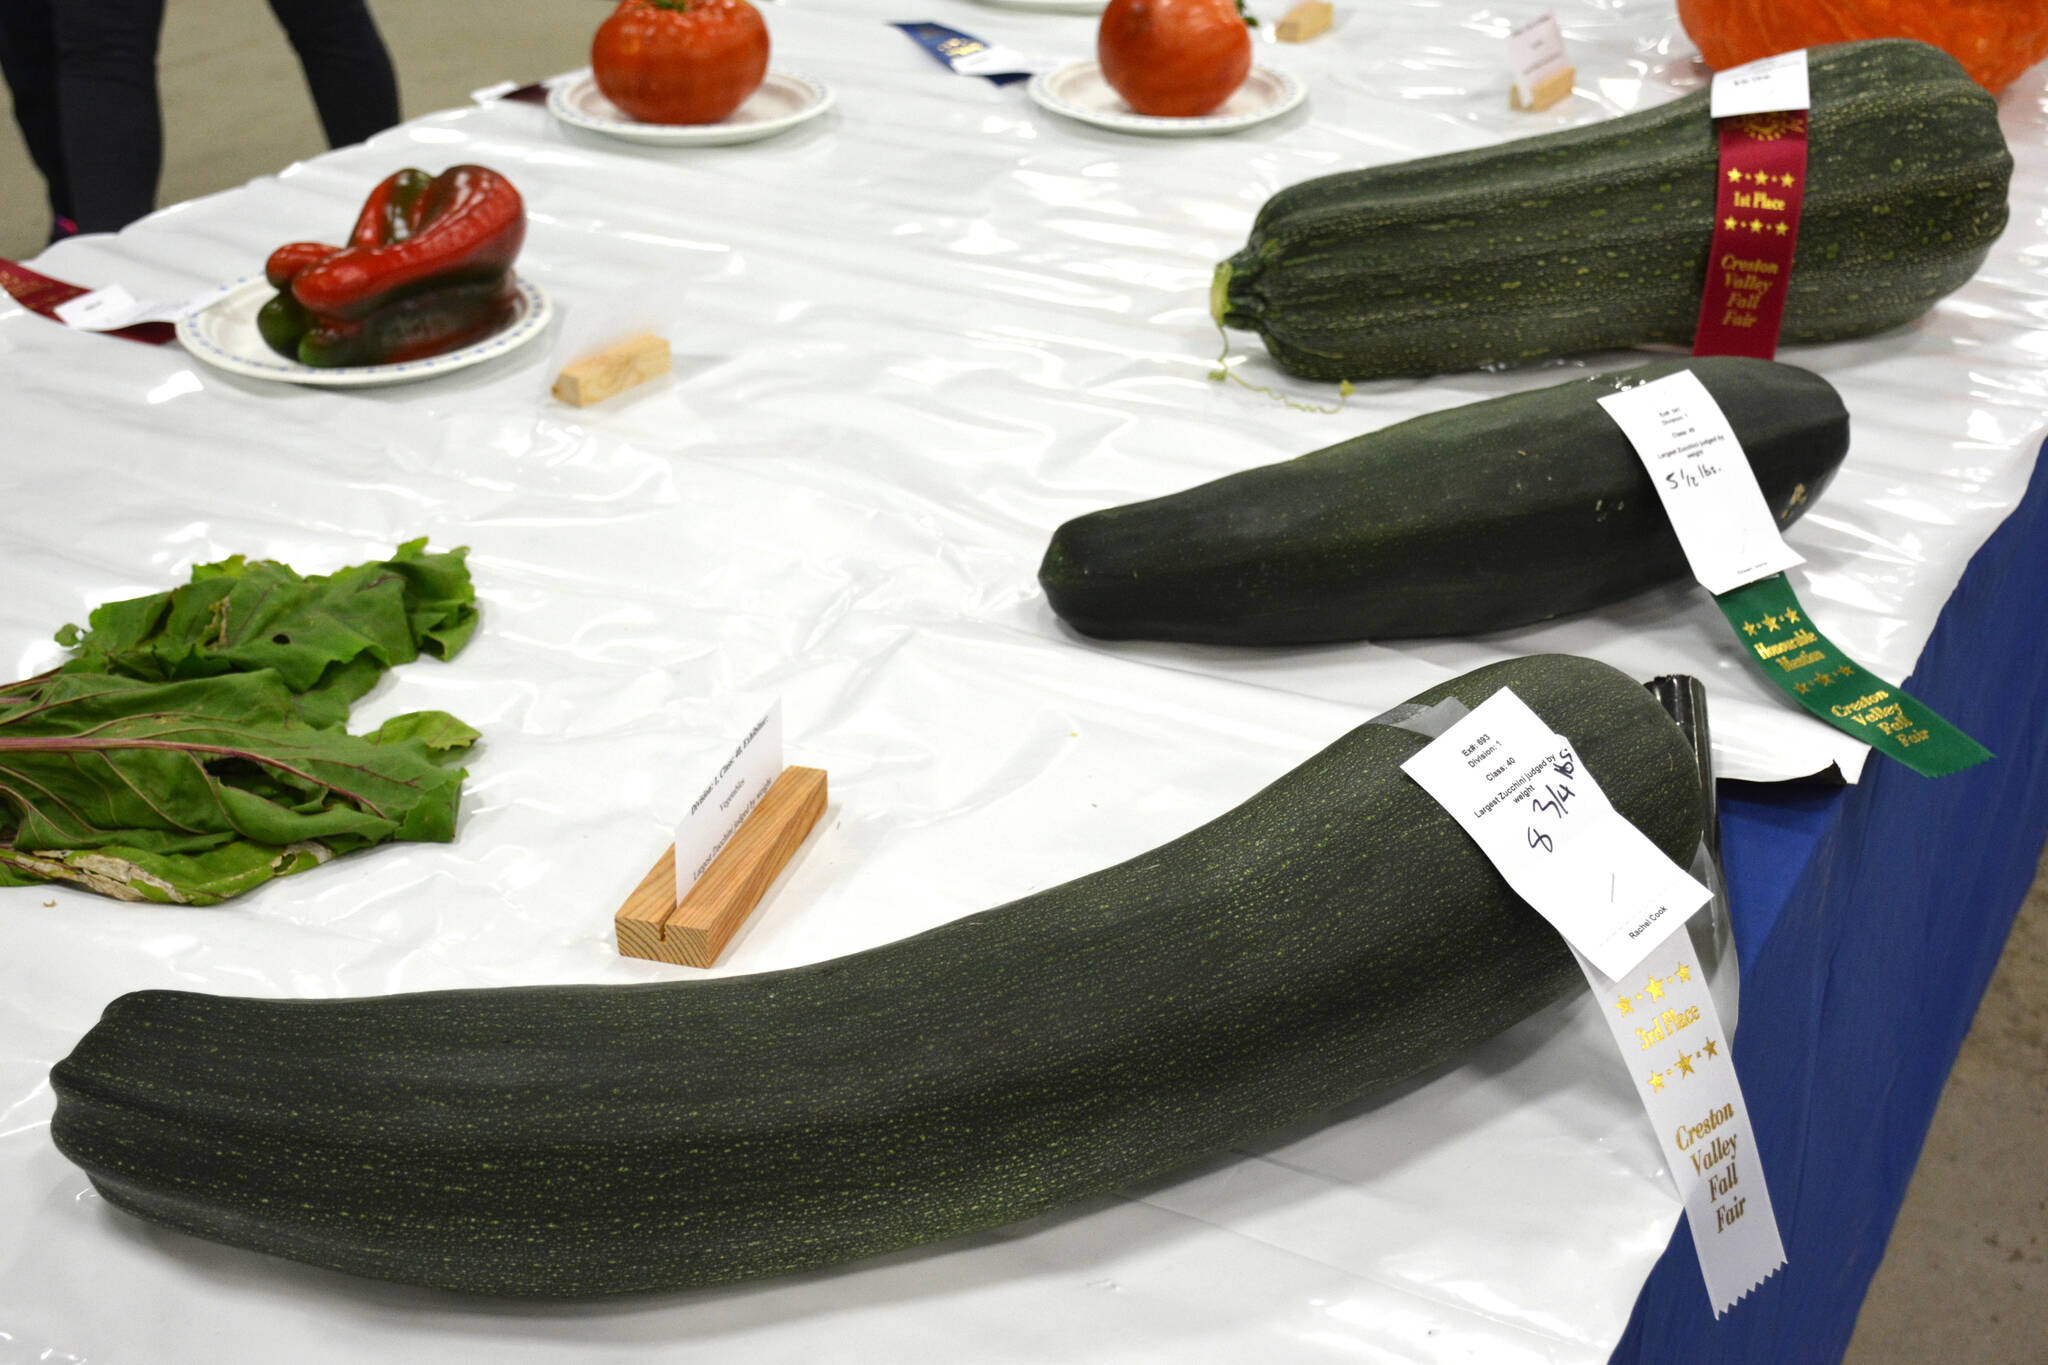 These prizewinning zucchinis weighed between 5 and 13 pounds each. (Photo by Kelsey Yates)